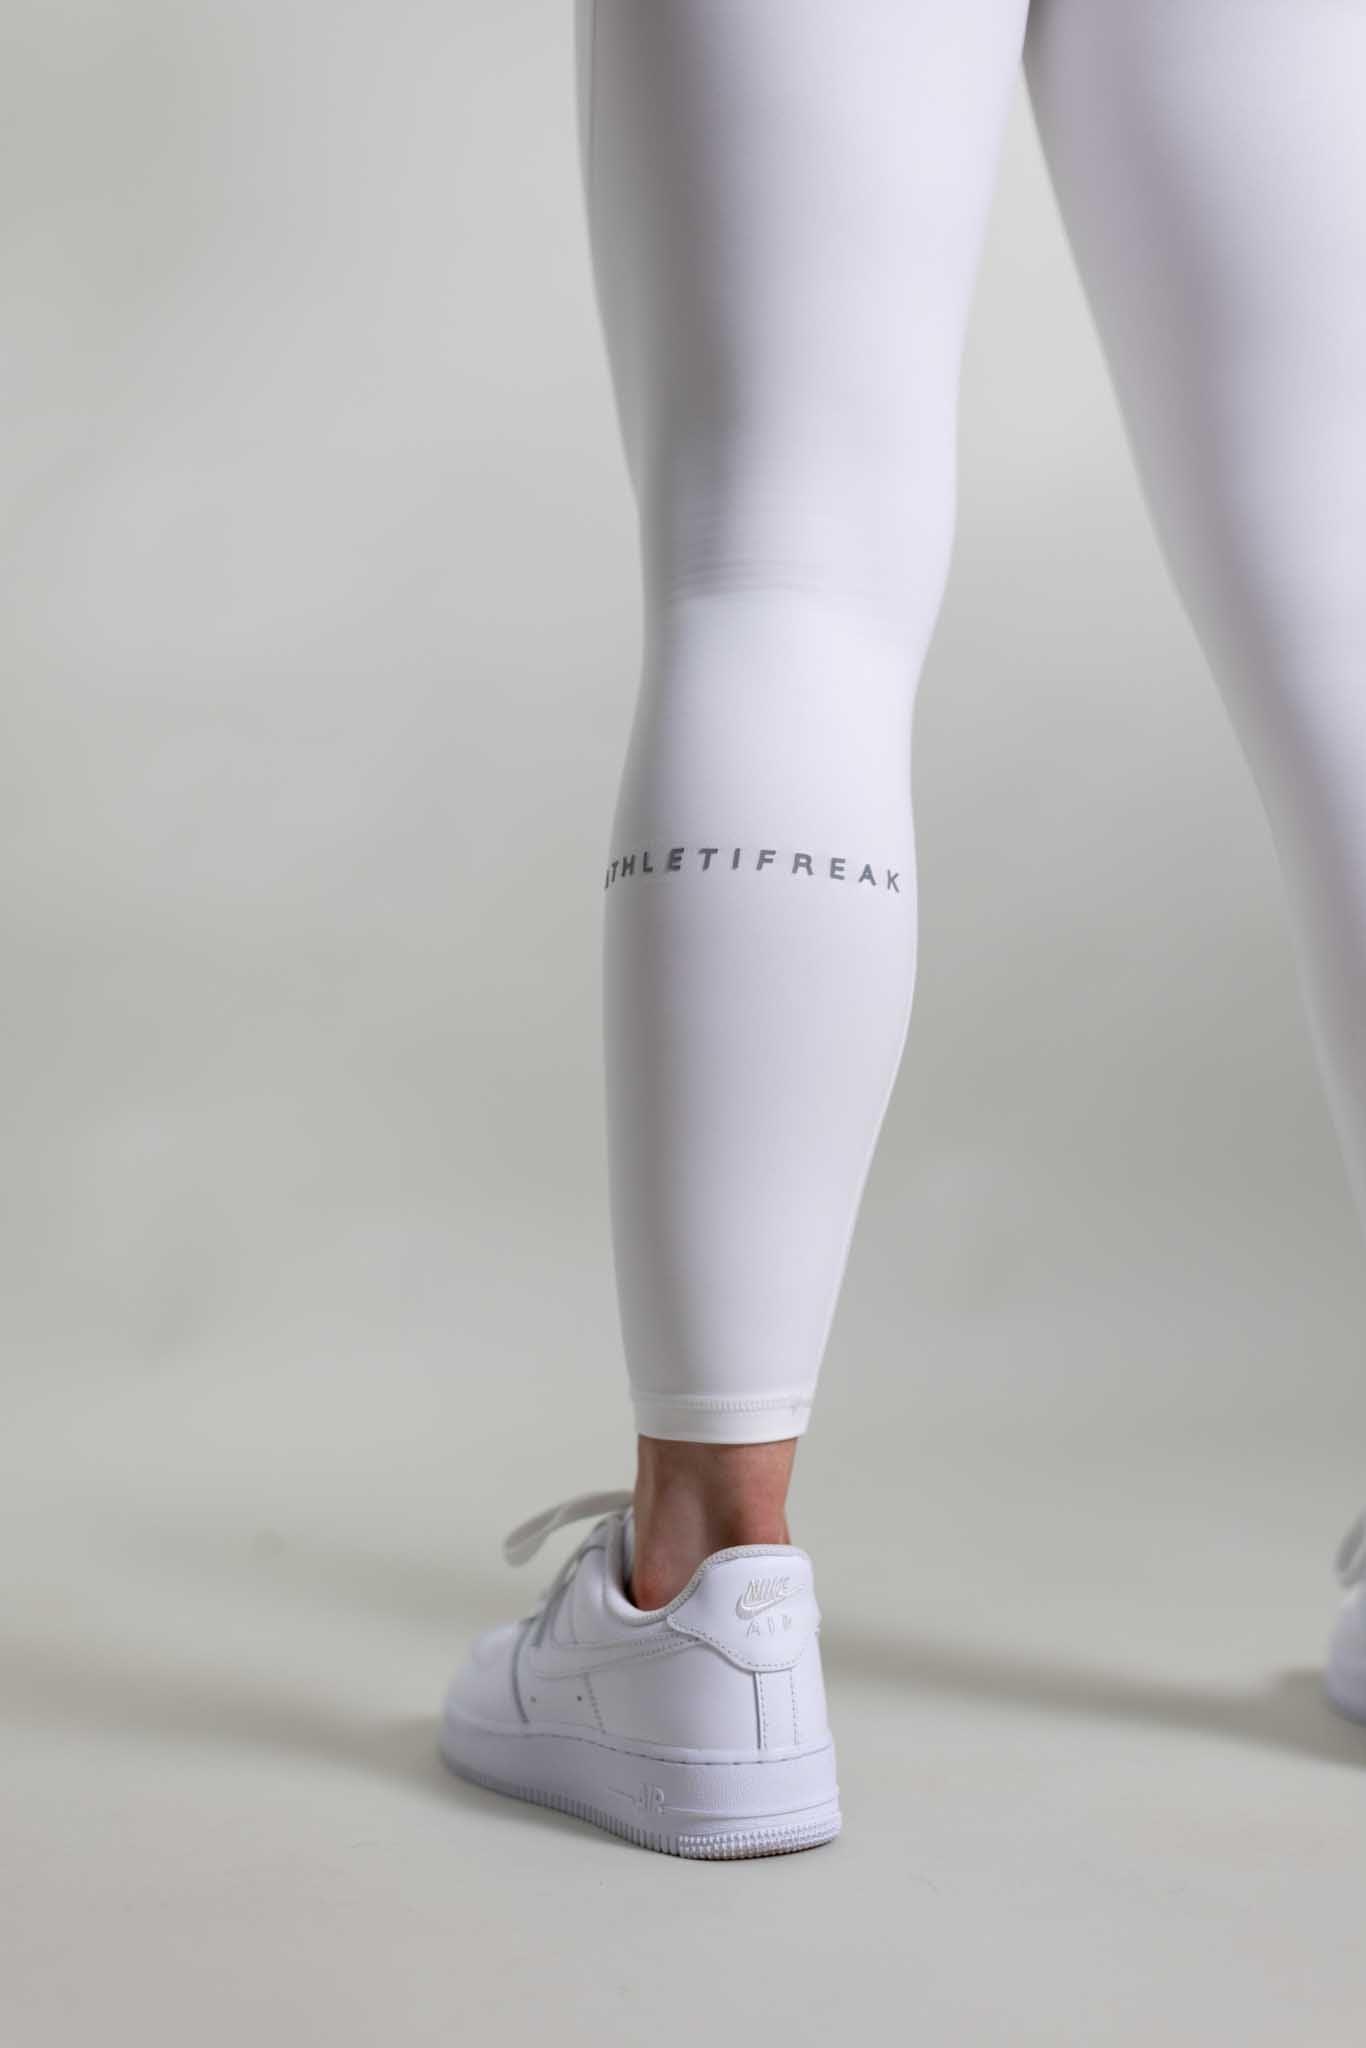 Buy INFUSE White Fitted Full Length Cotton Lycra Womens Leggings